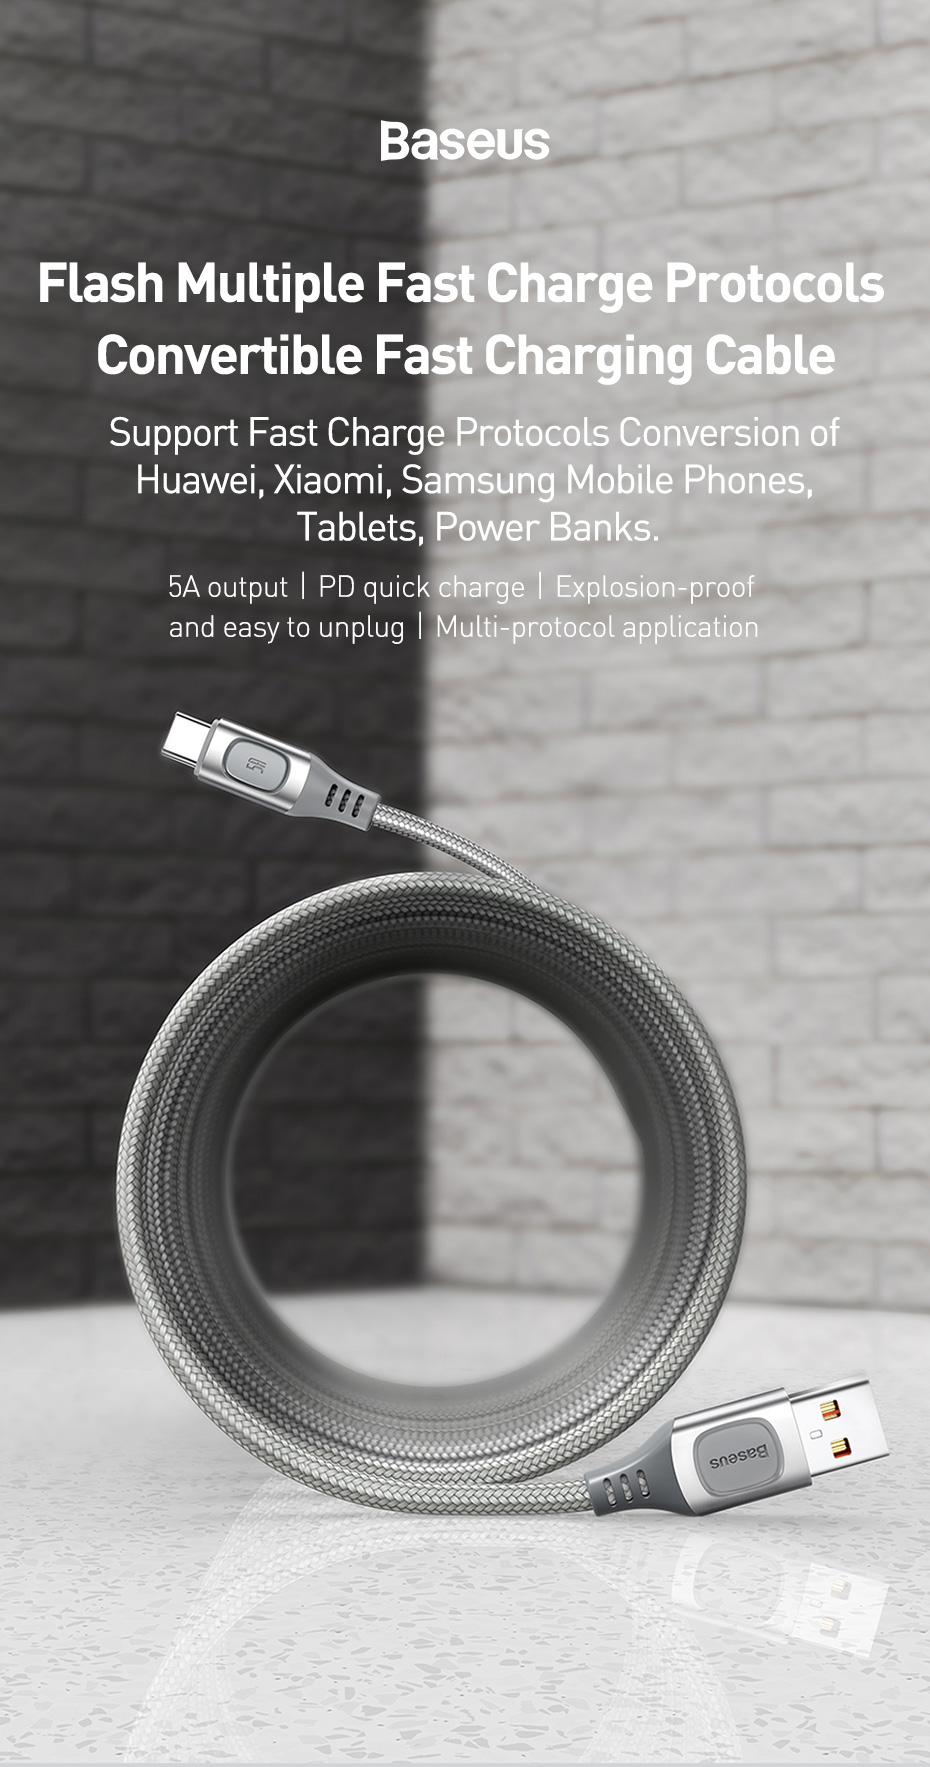 Baseus-5A-USB-Type-C-Cable-Multi-protocol-Conversion-Support-QC30-PD30-SCP-FCP-AFC-Protocol-Fast-Cha-1717694-1